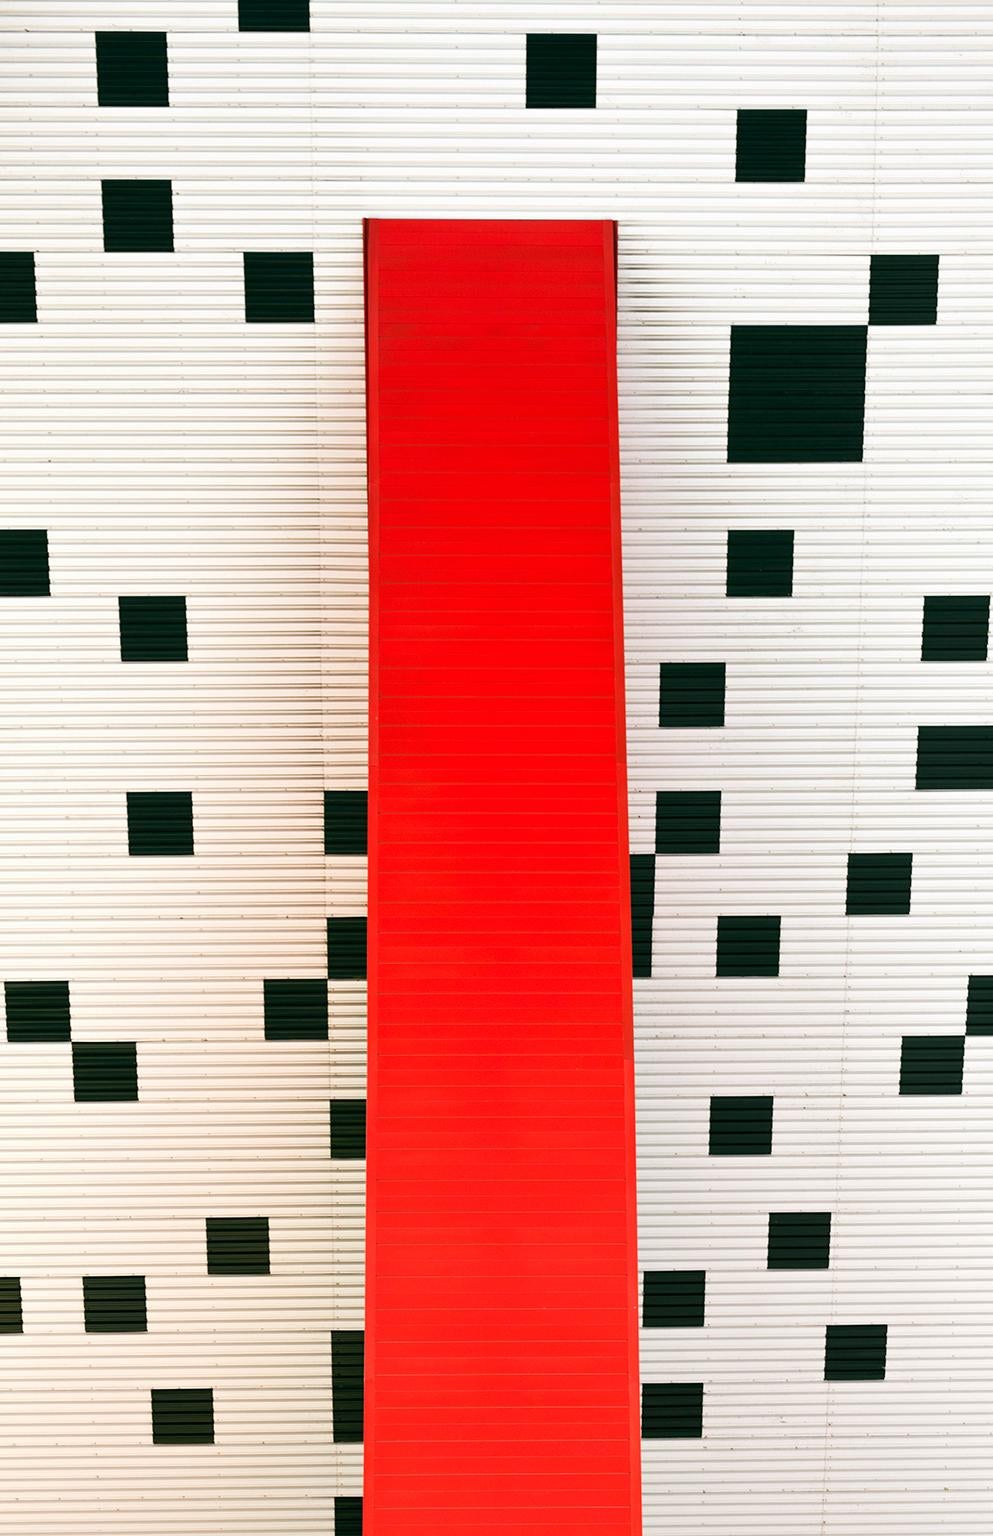 Architectural Detail, Ontario College of Art, Toronto, Canada, Archival Pigment Print, 2011.

Cosmo Condina’s photographs are wonderfully simple, graphic and elegant.
